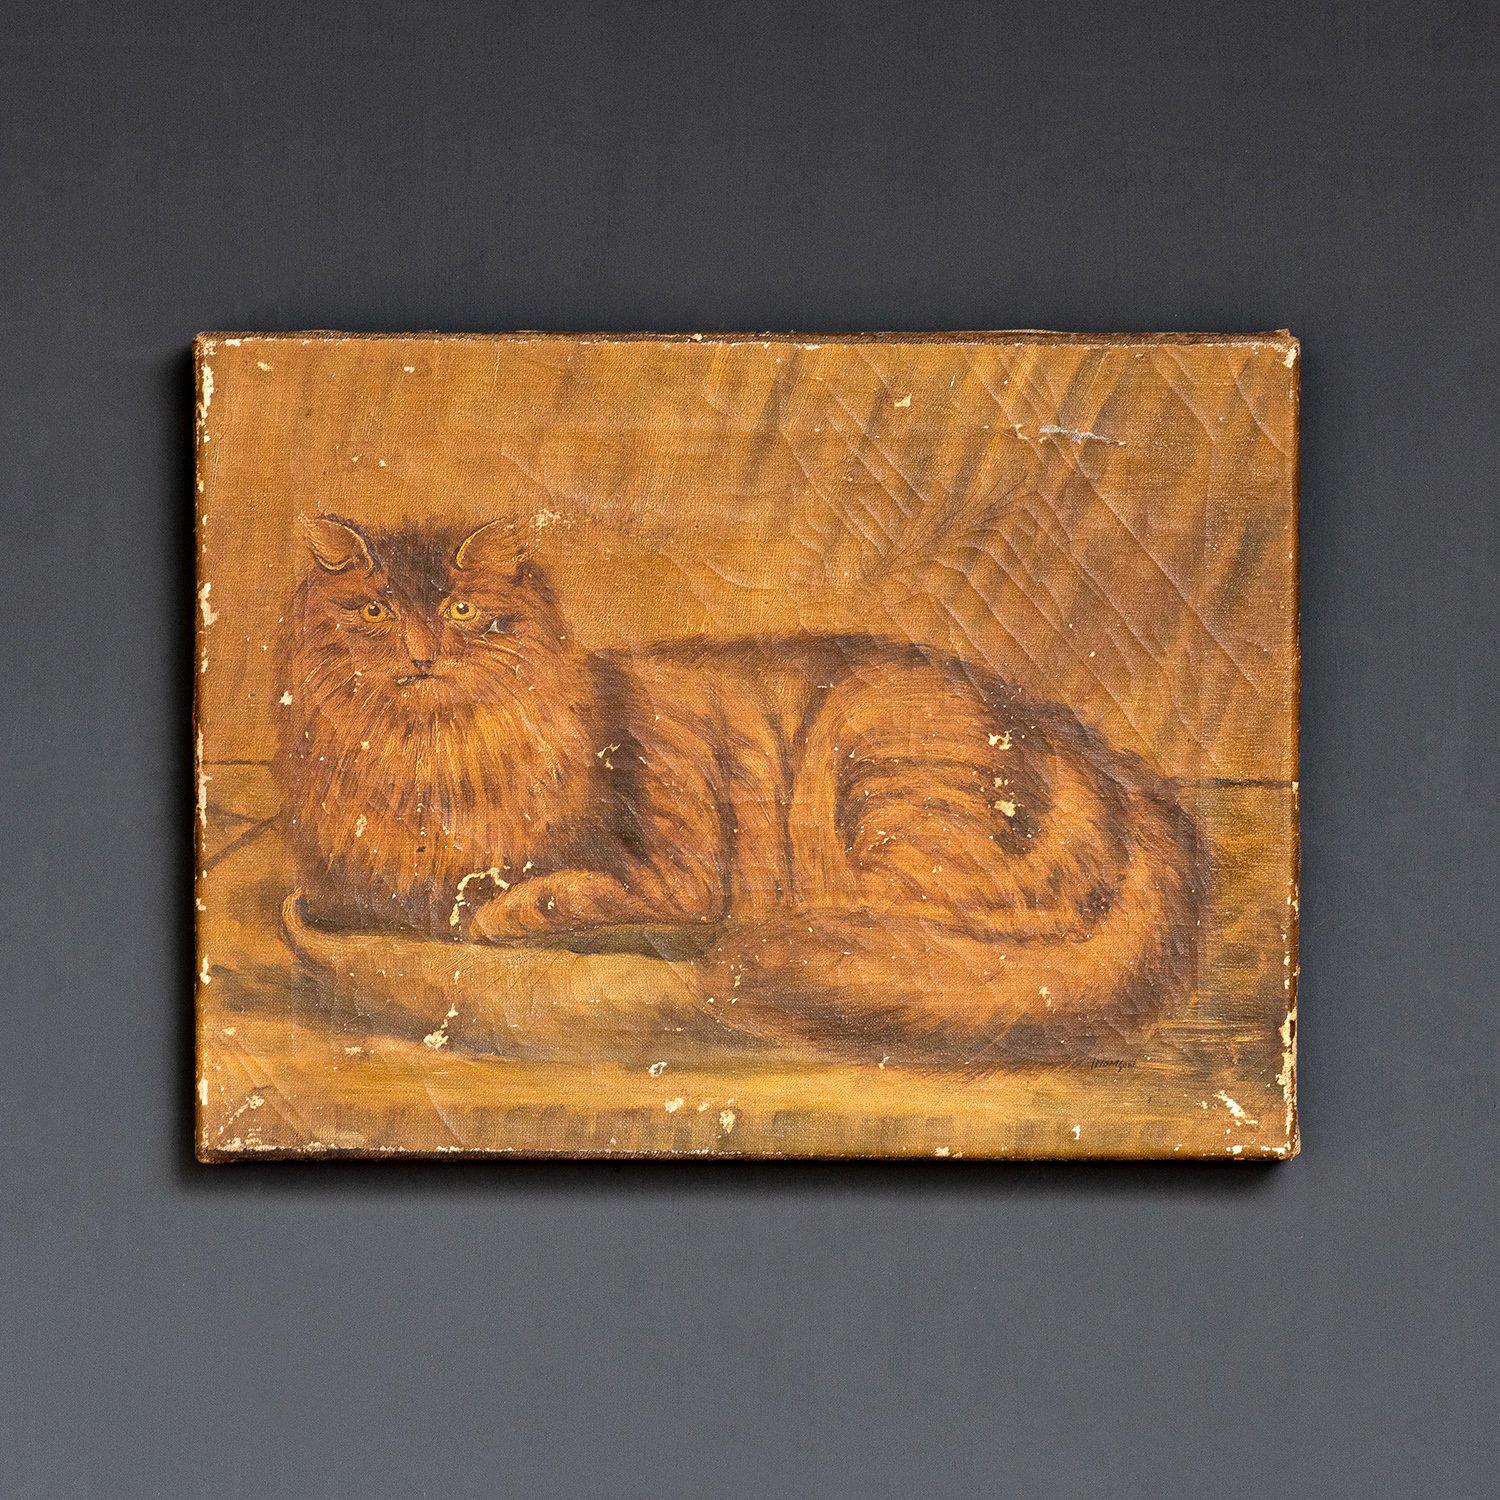 Antique original oil painting.
A charming study of a fluffy cat curled up and staring directly at you.
 
Painted in the naive style.
 
Probably dating to the early 19th Century.
 
The painting does have some wear to the painted surface this could be